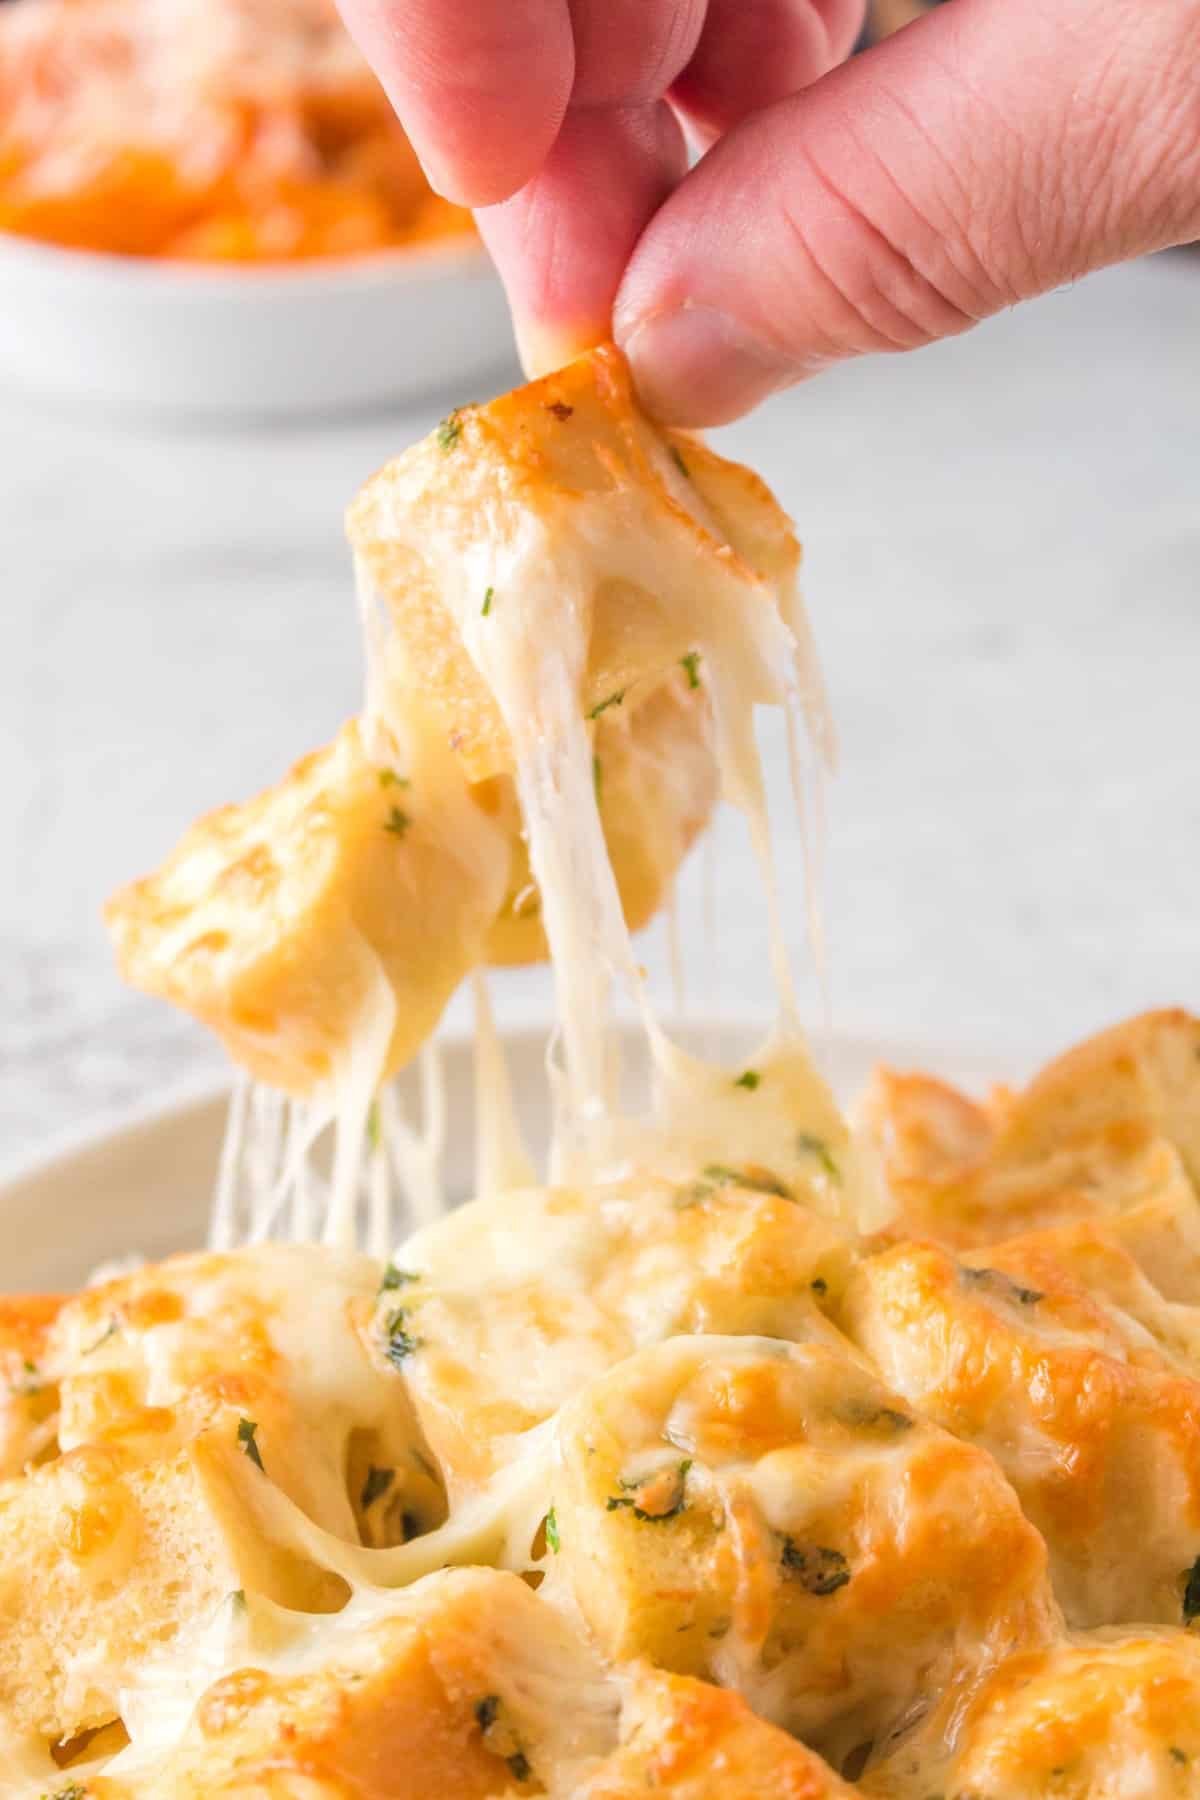 A person lifting up cheesy bread from a plate.